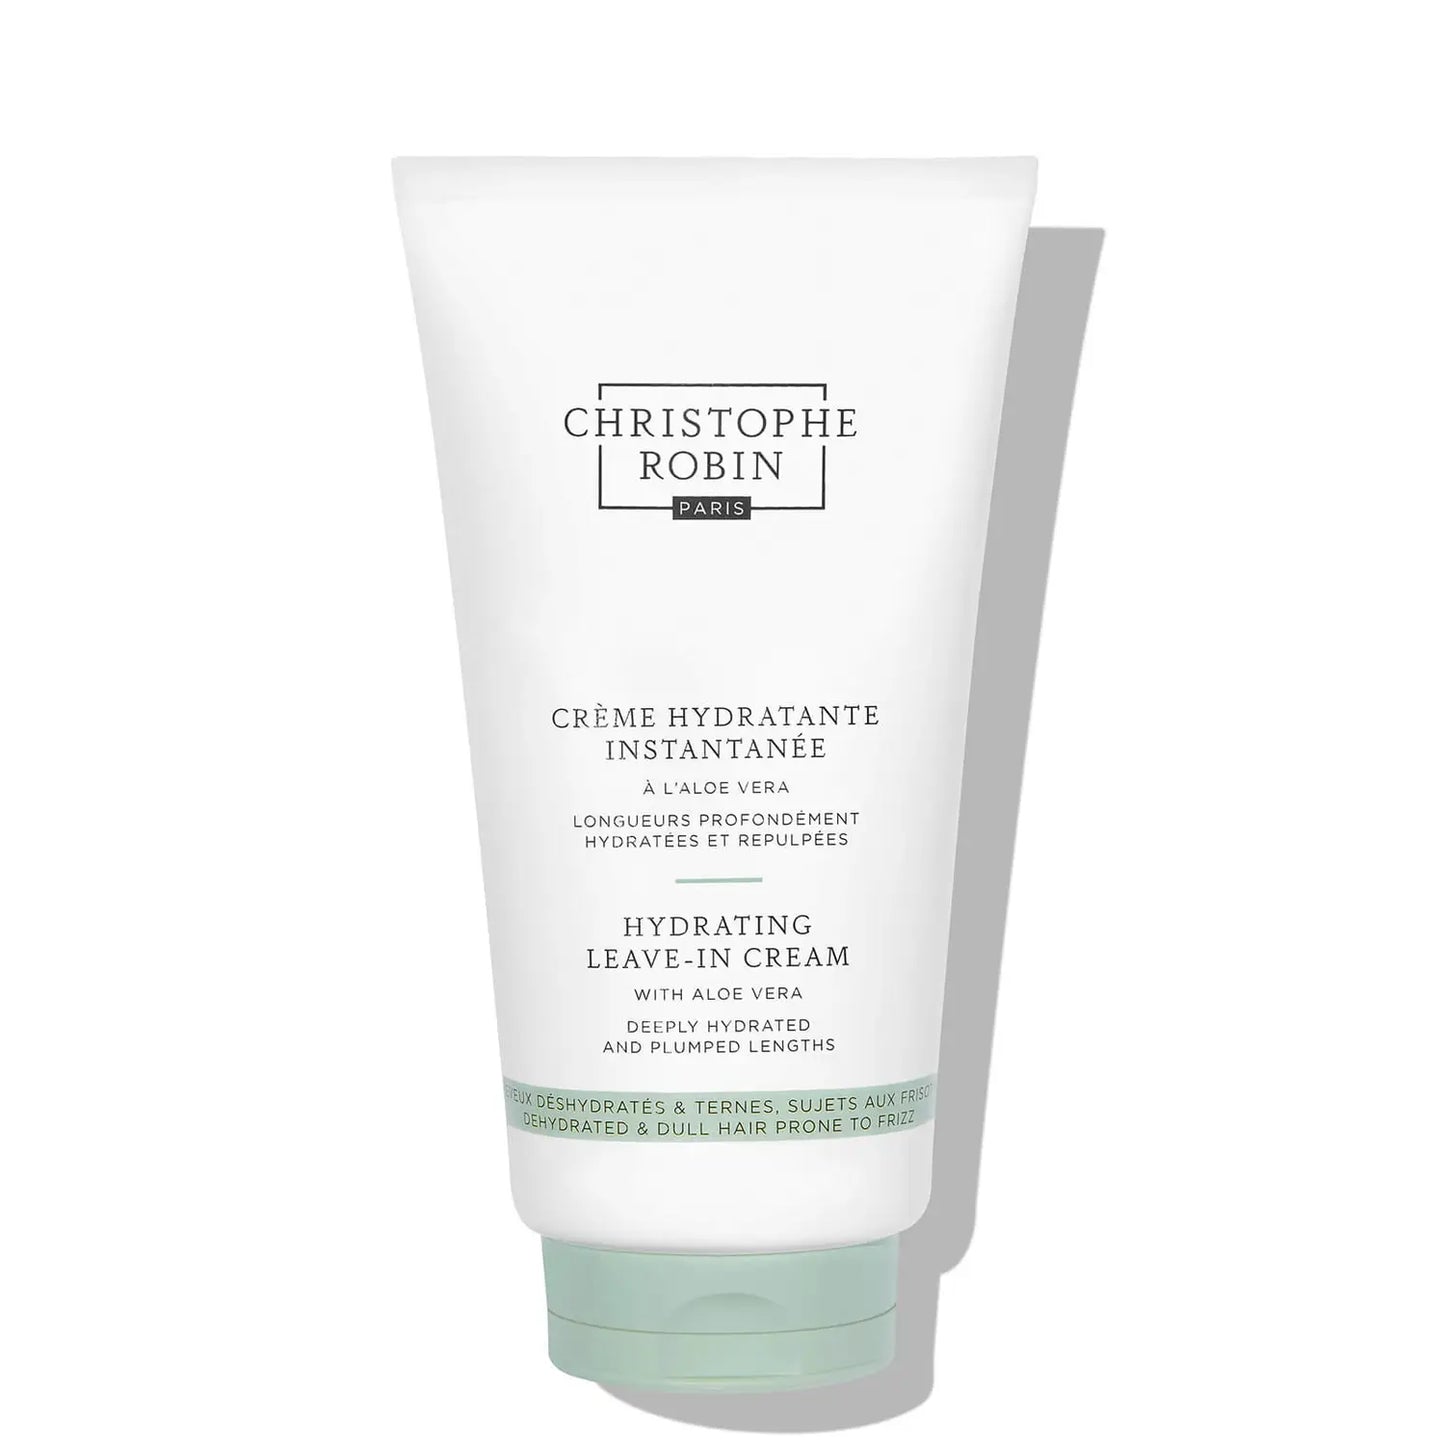 Christophe Robin The Hydrating Leave-in Cream with Aloe Vera 150ml